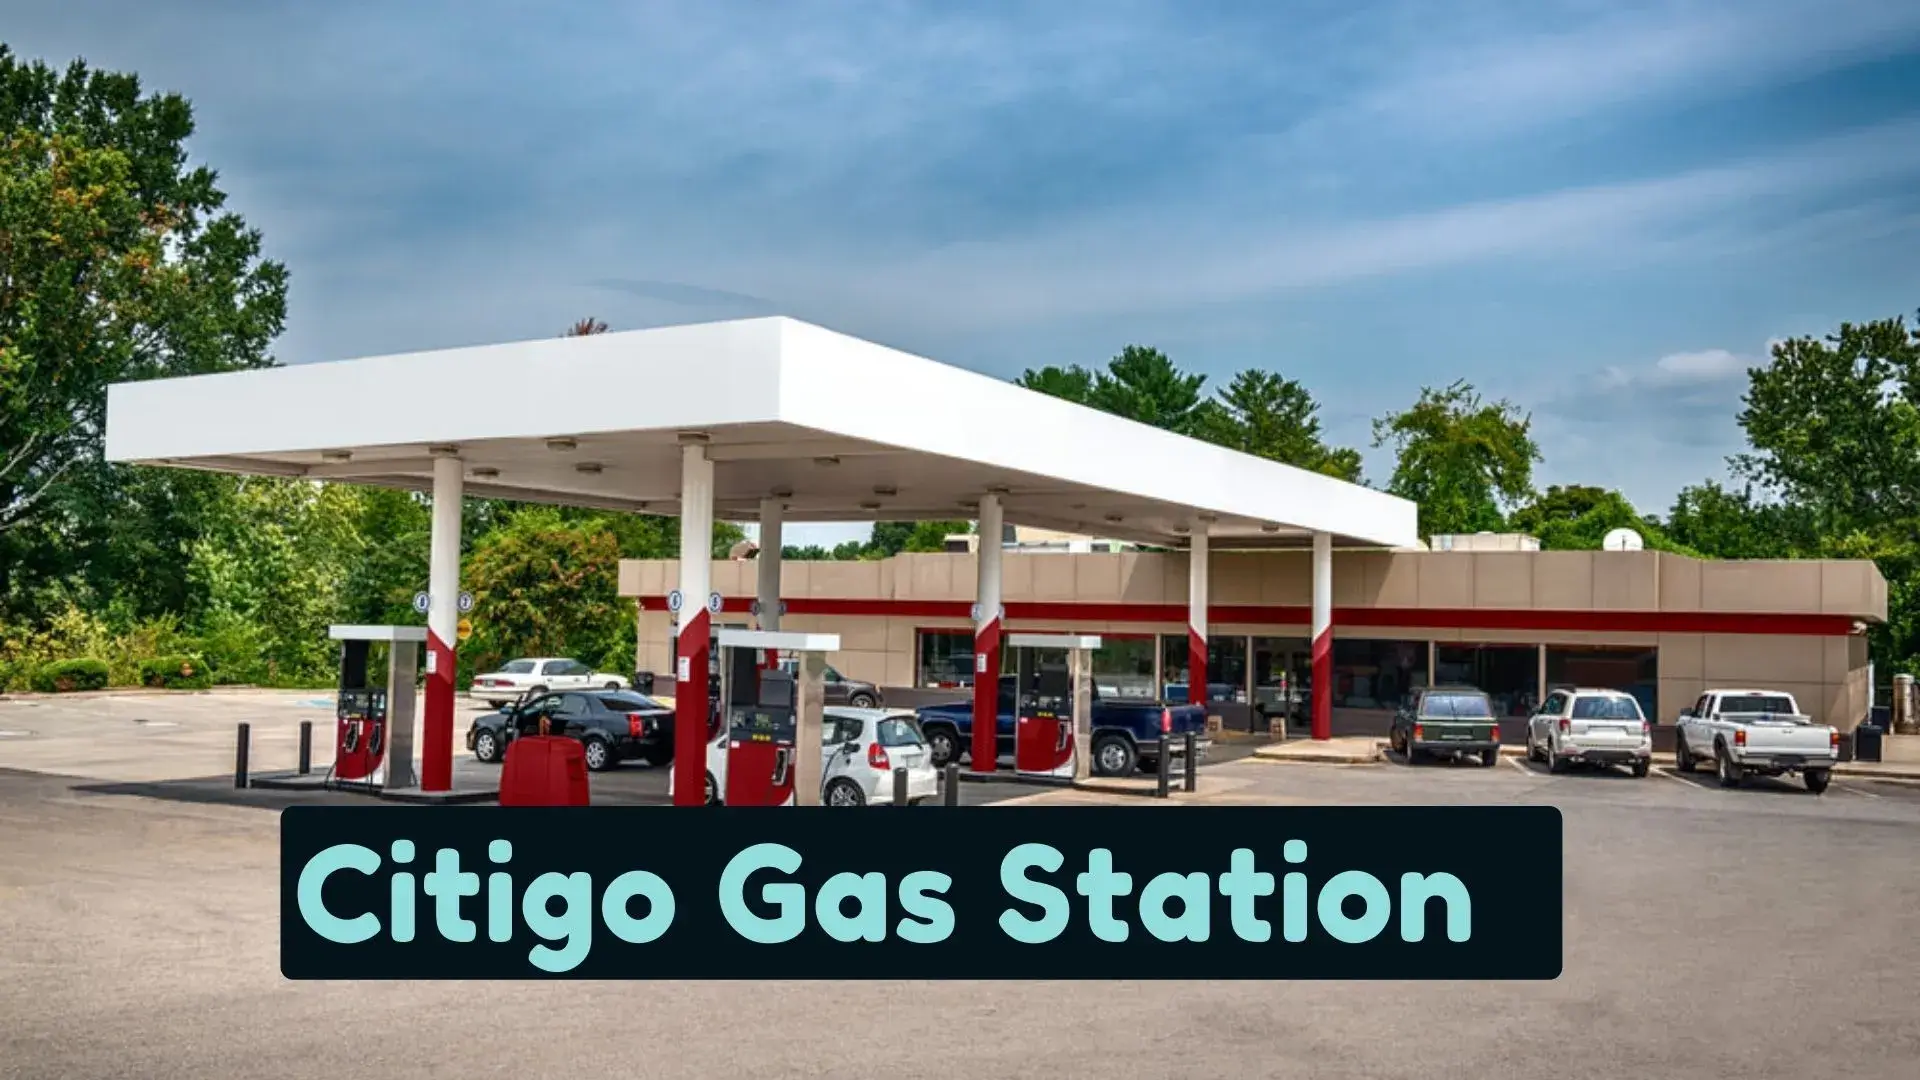 Find out where the nearest Citgo gas station is to you | Get directions, view Citgo hours, and learn about services and amenities.